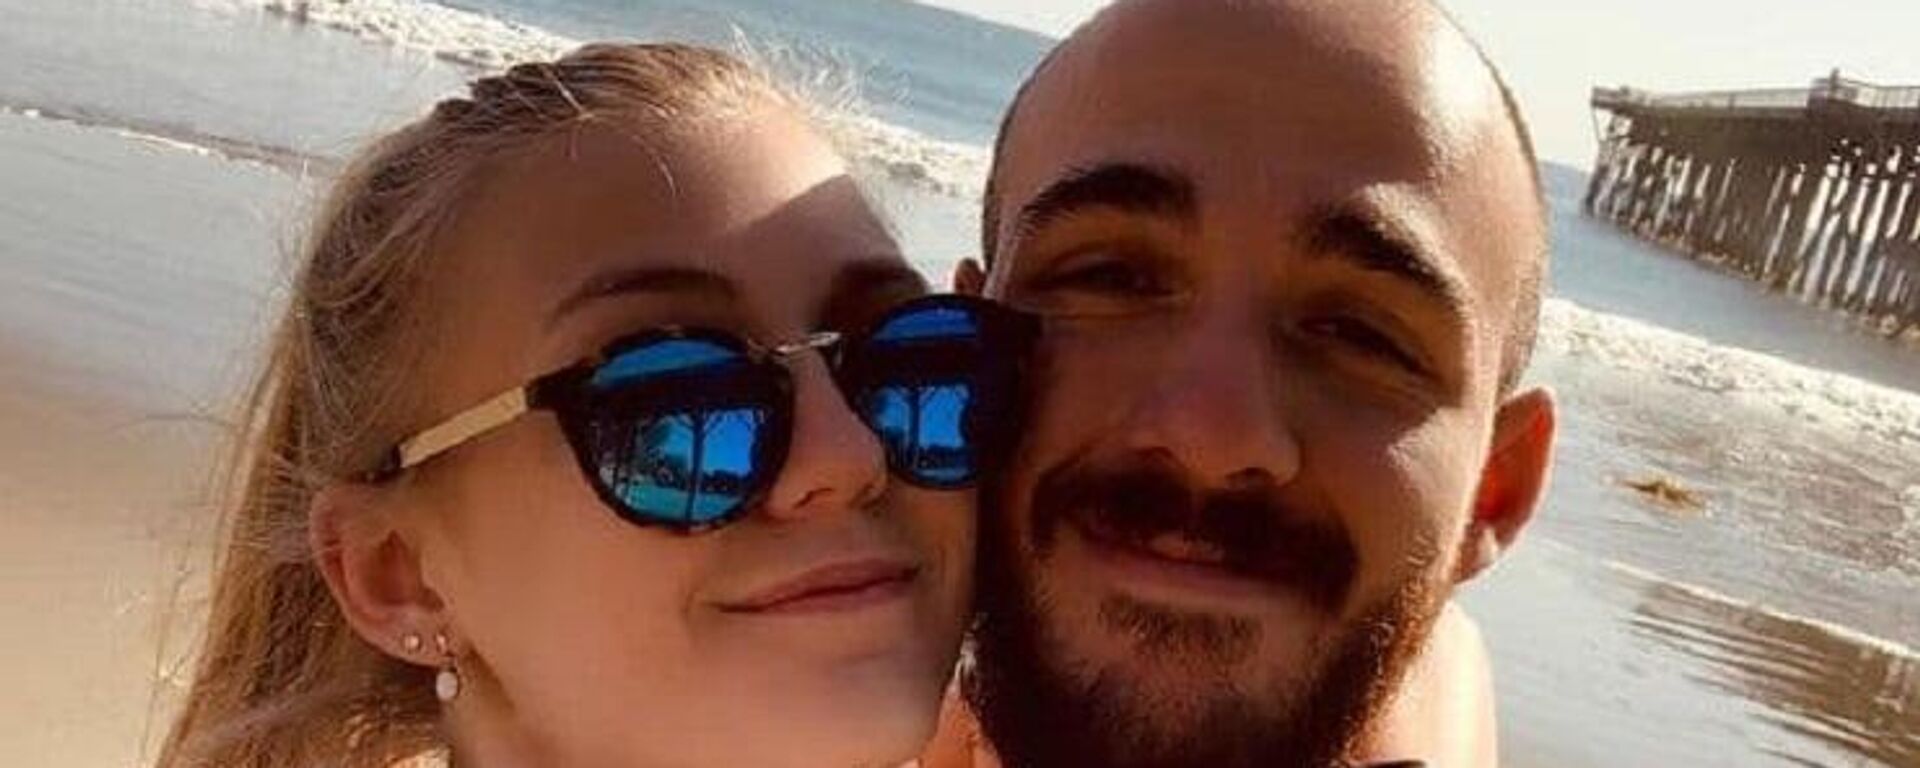 An Instagram photo of missing woman Gabrielle Petito and her boyfriend Brian Laundrie on March 18, 2020 - Sputnik International, 1920, 22.09.2021